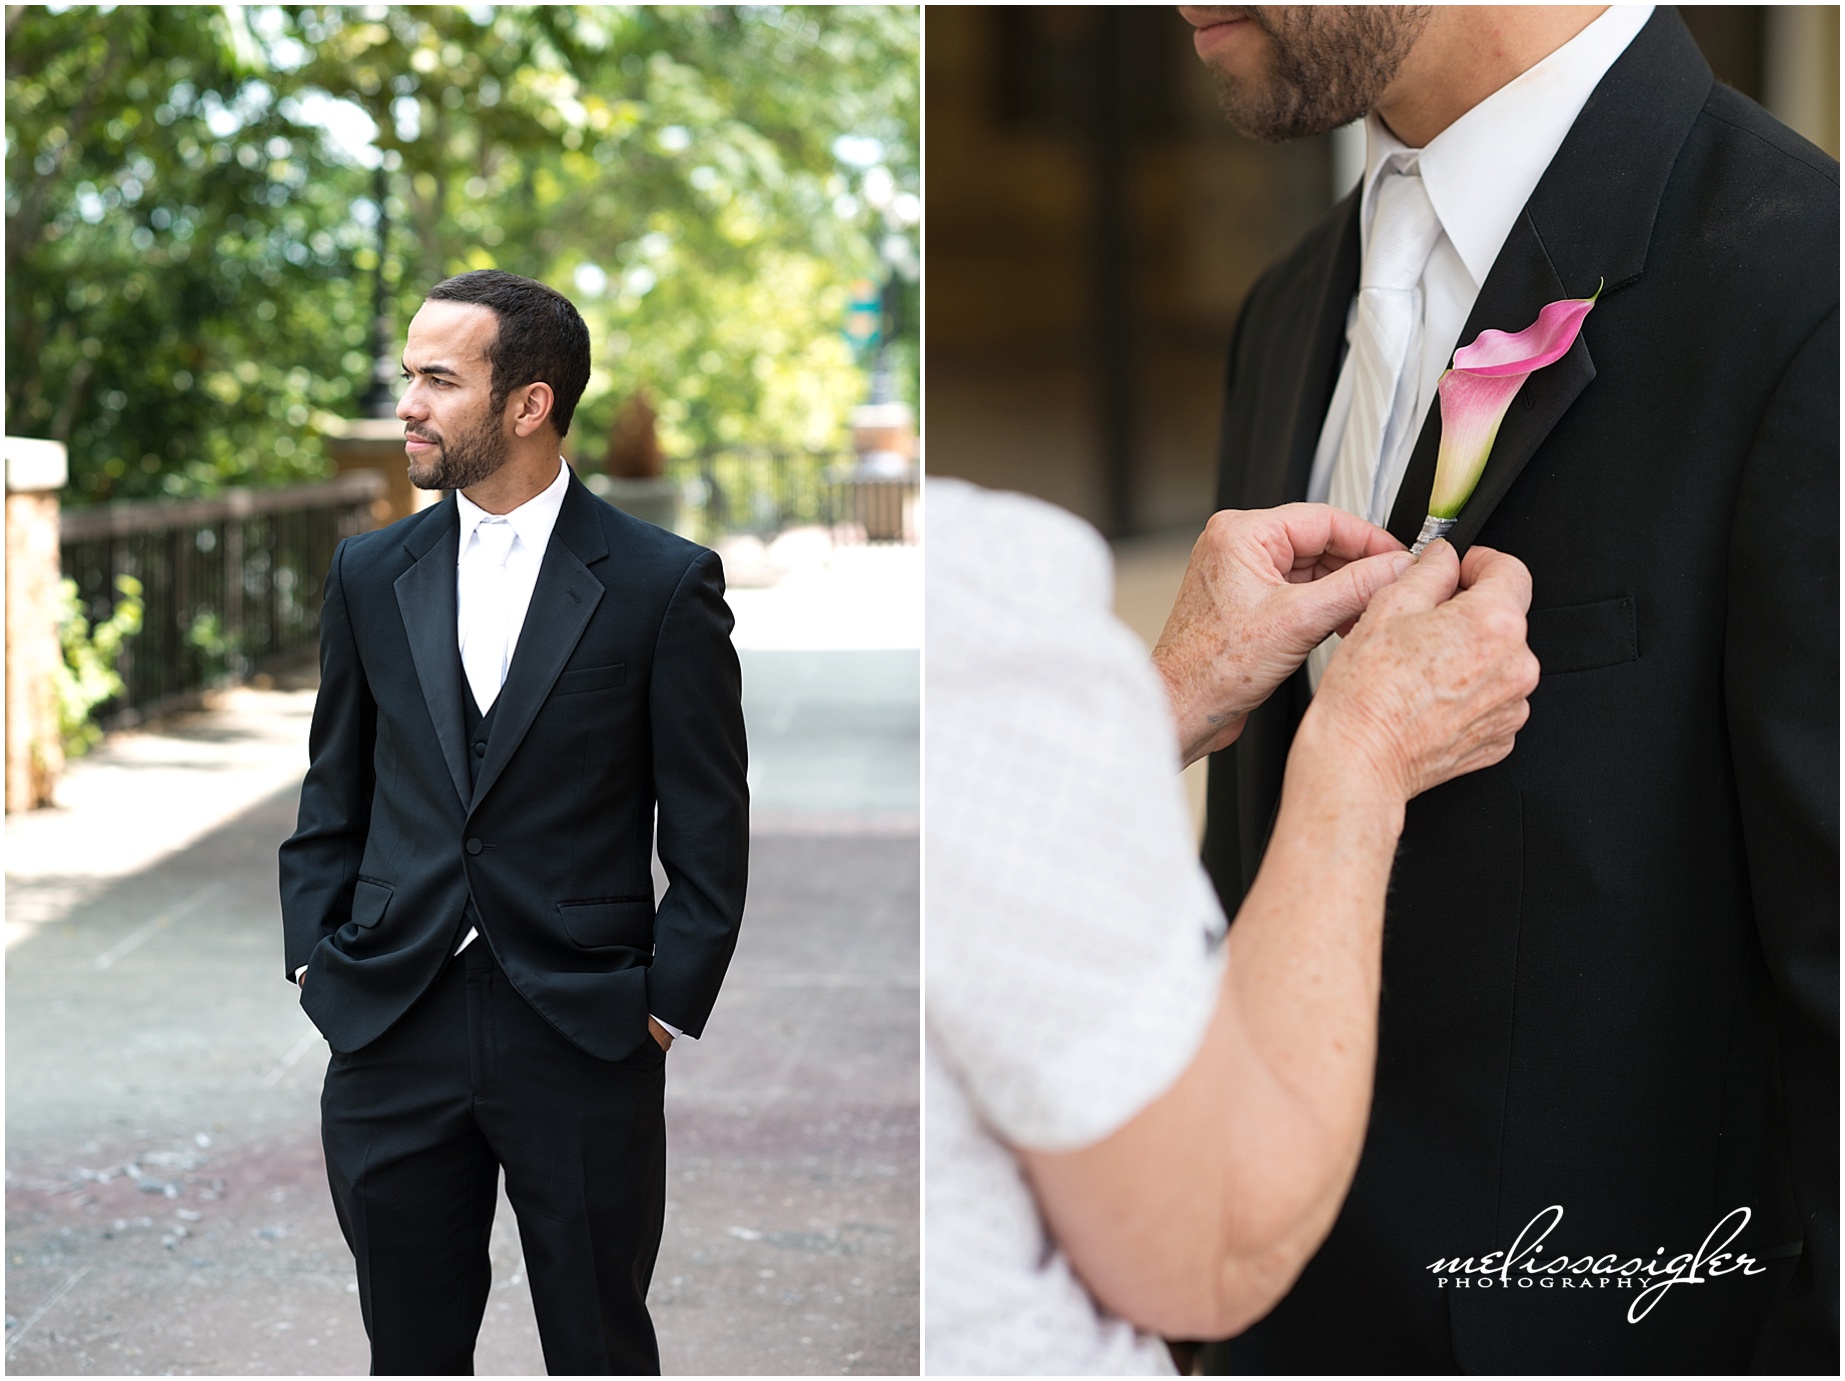 Wedding preparation at Springhill Suites by Lawrence wedding photographer Melissa Sigler